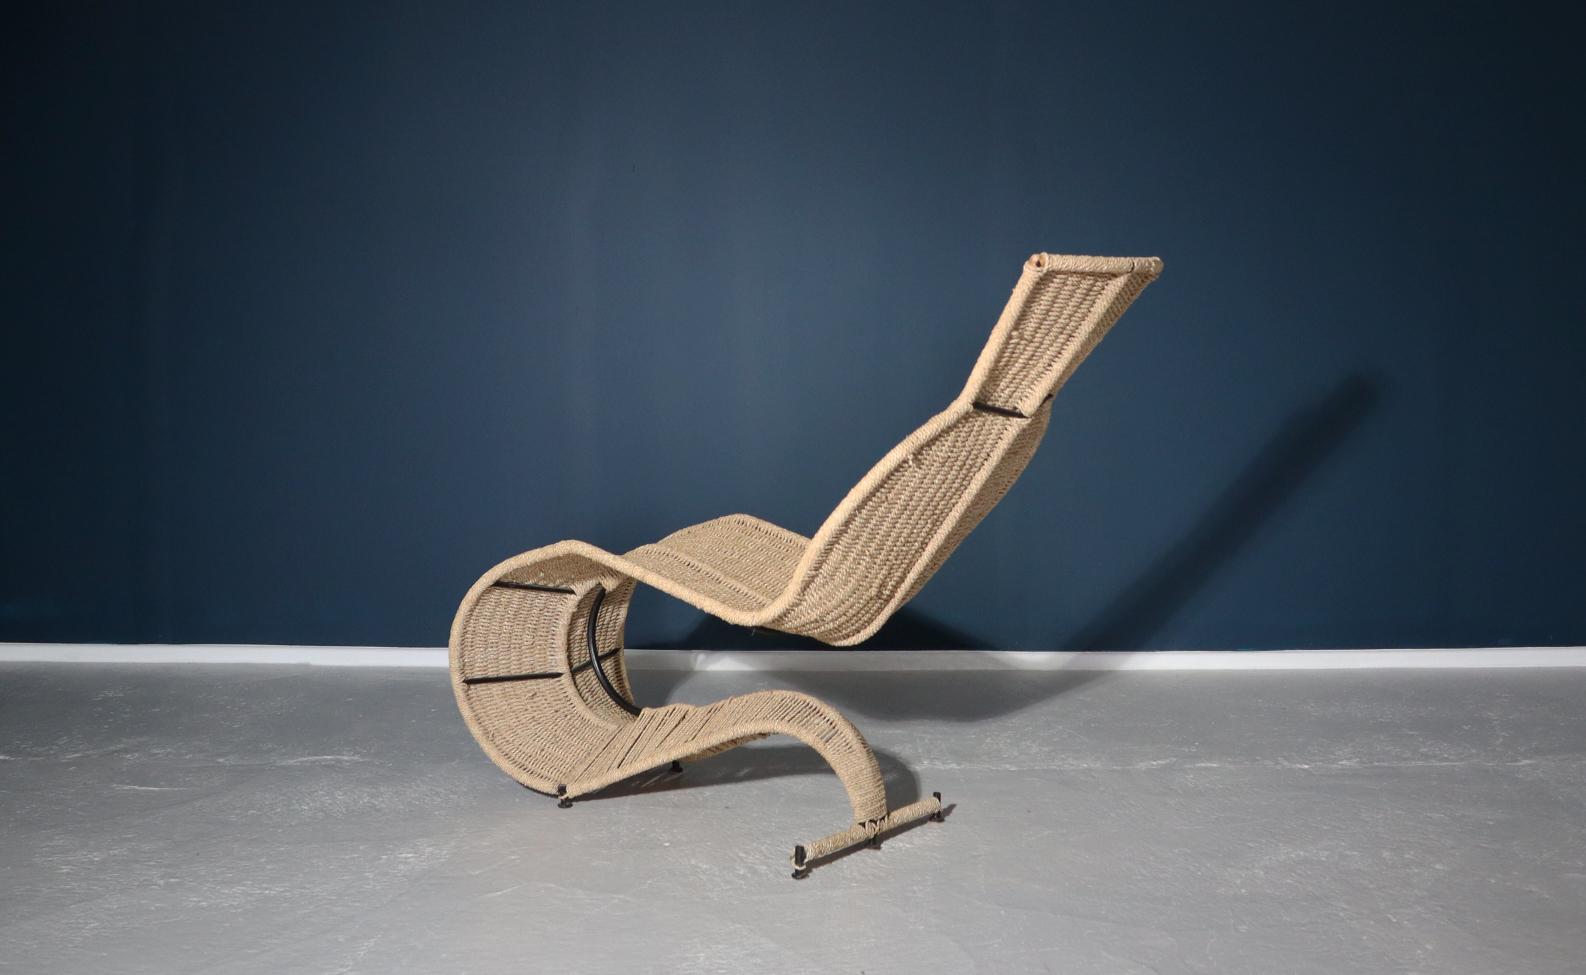 Post-Modern Sculpture Tom Dixon 'Bolide' Woven Seagrass Chair, London, 1991 For Sale